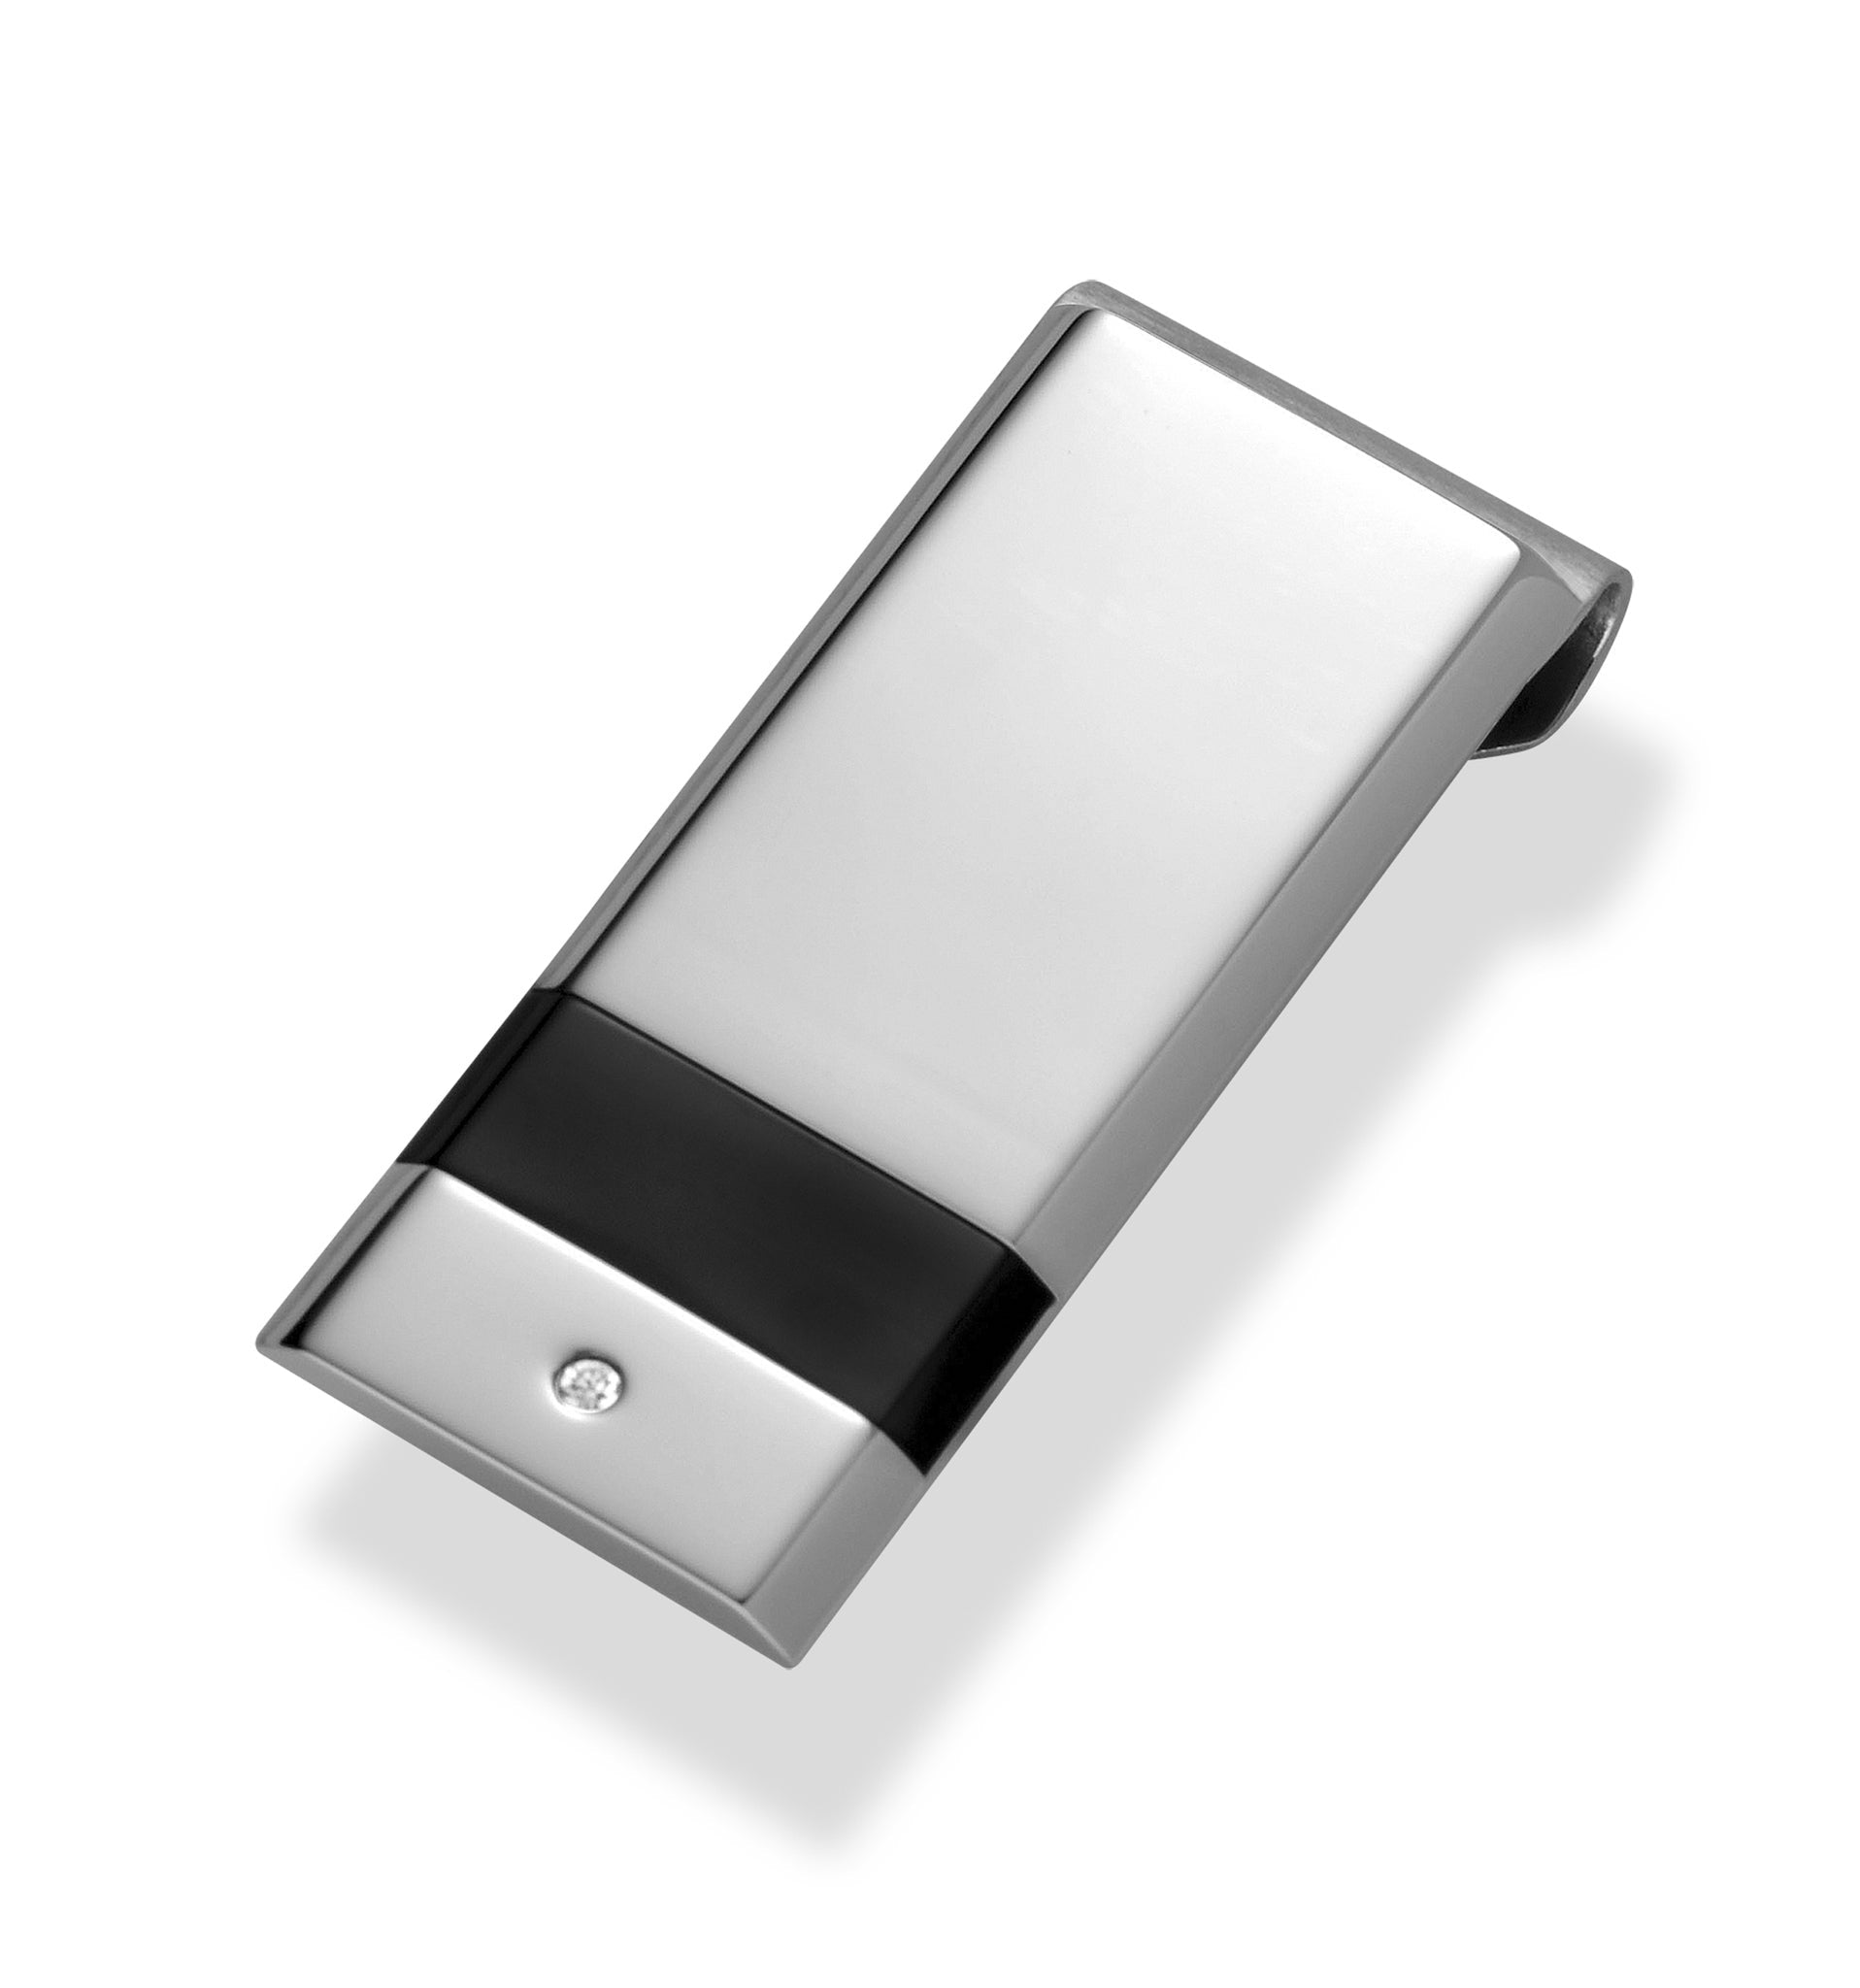 A stainless steel money clip with diamond & black accent bar displayed on a neutral white background.